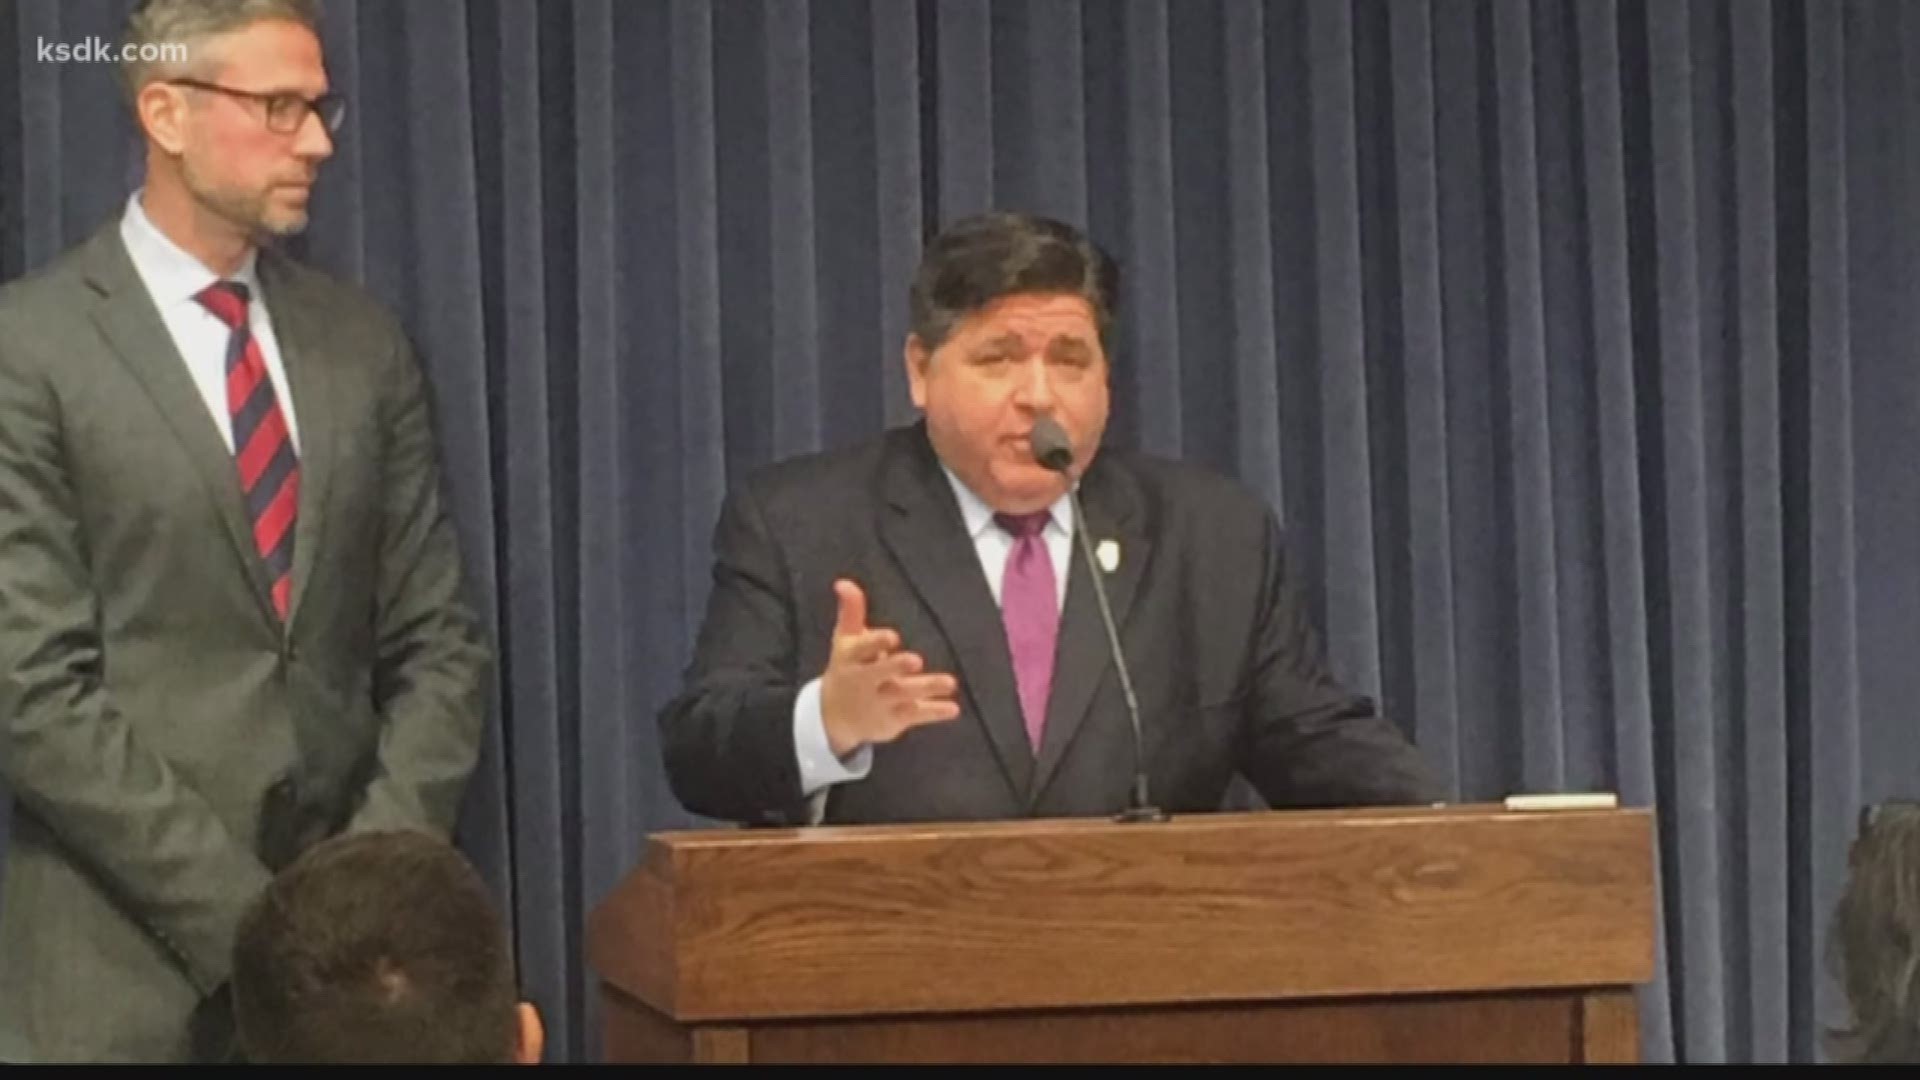 Pritzker to deliver Illinois state of the budget